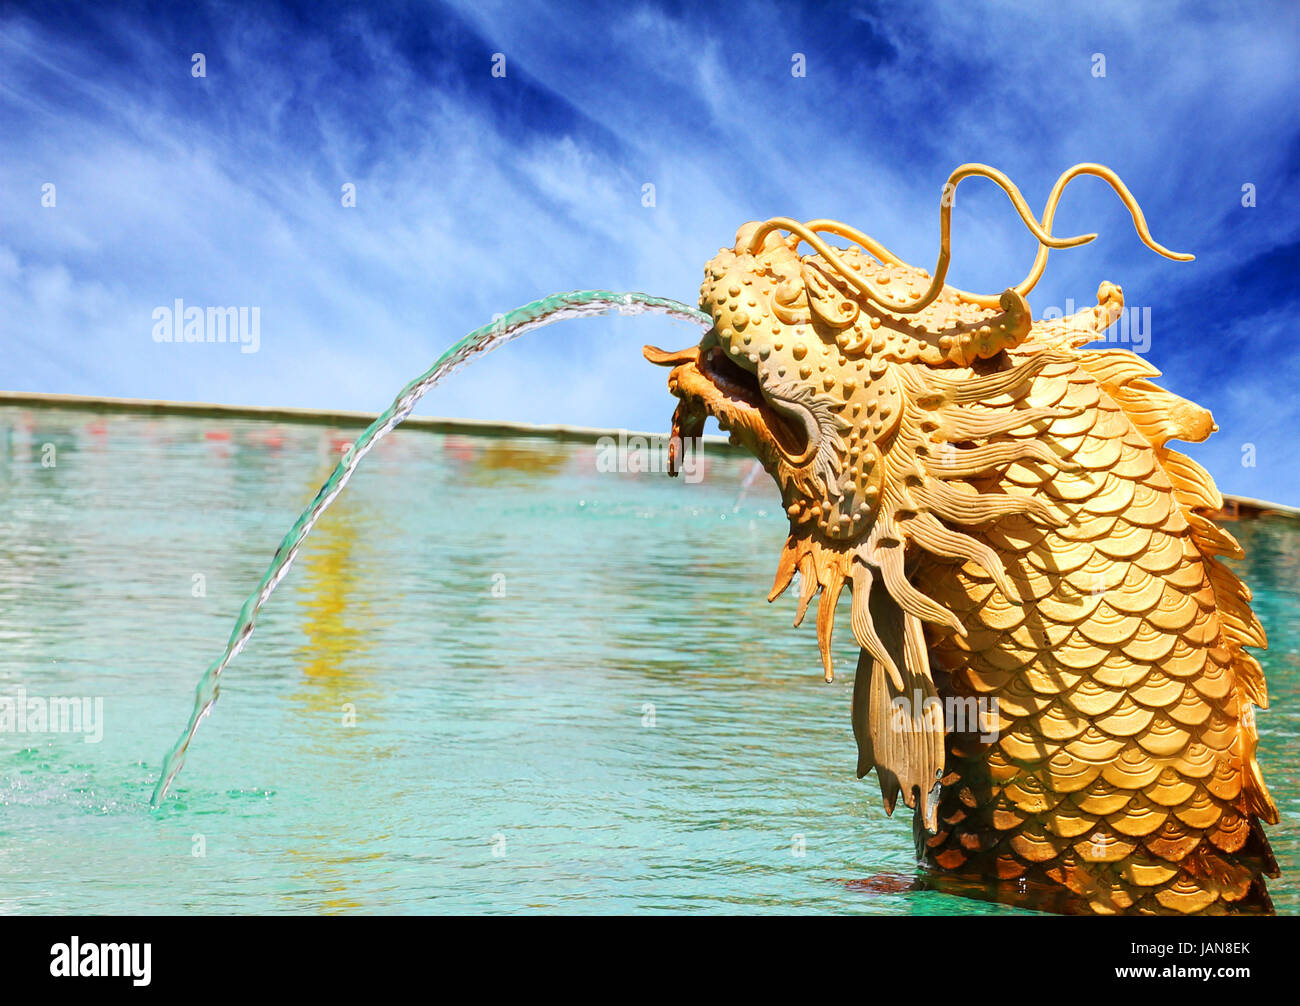 The Dragon being spray water. Stock Photo